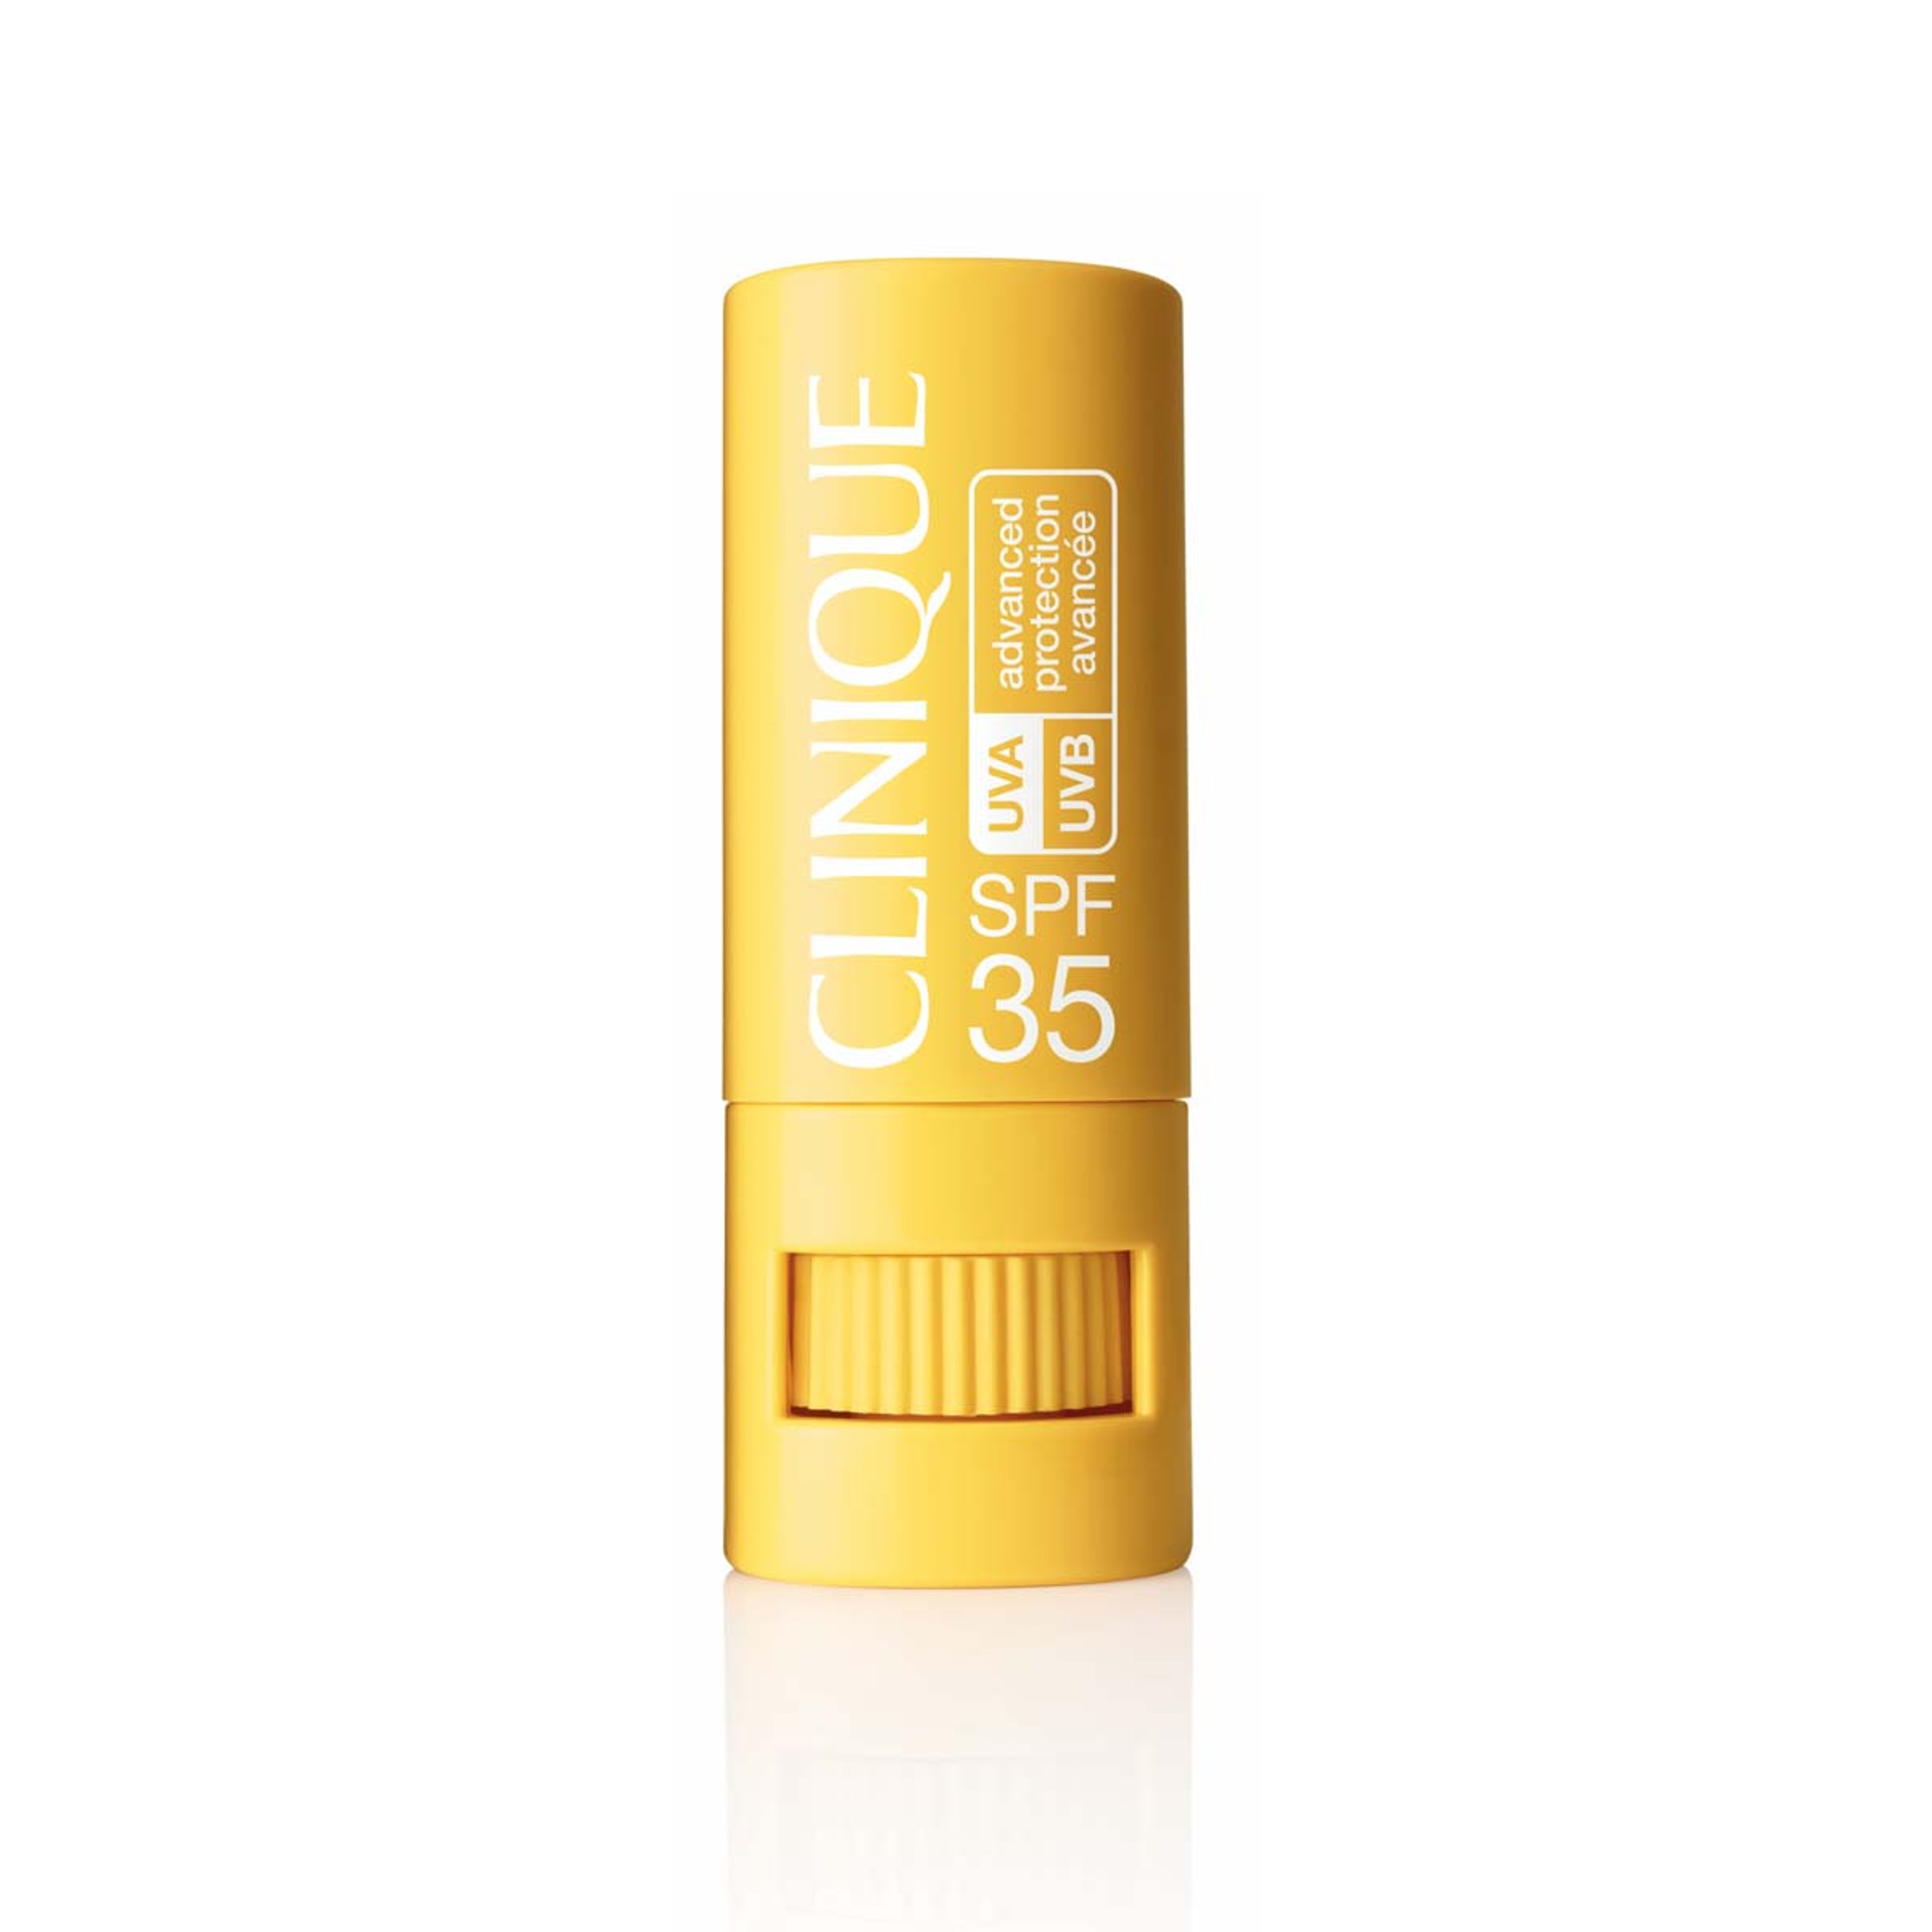 Clinique Targeted Protection Stick Spf 35 1